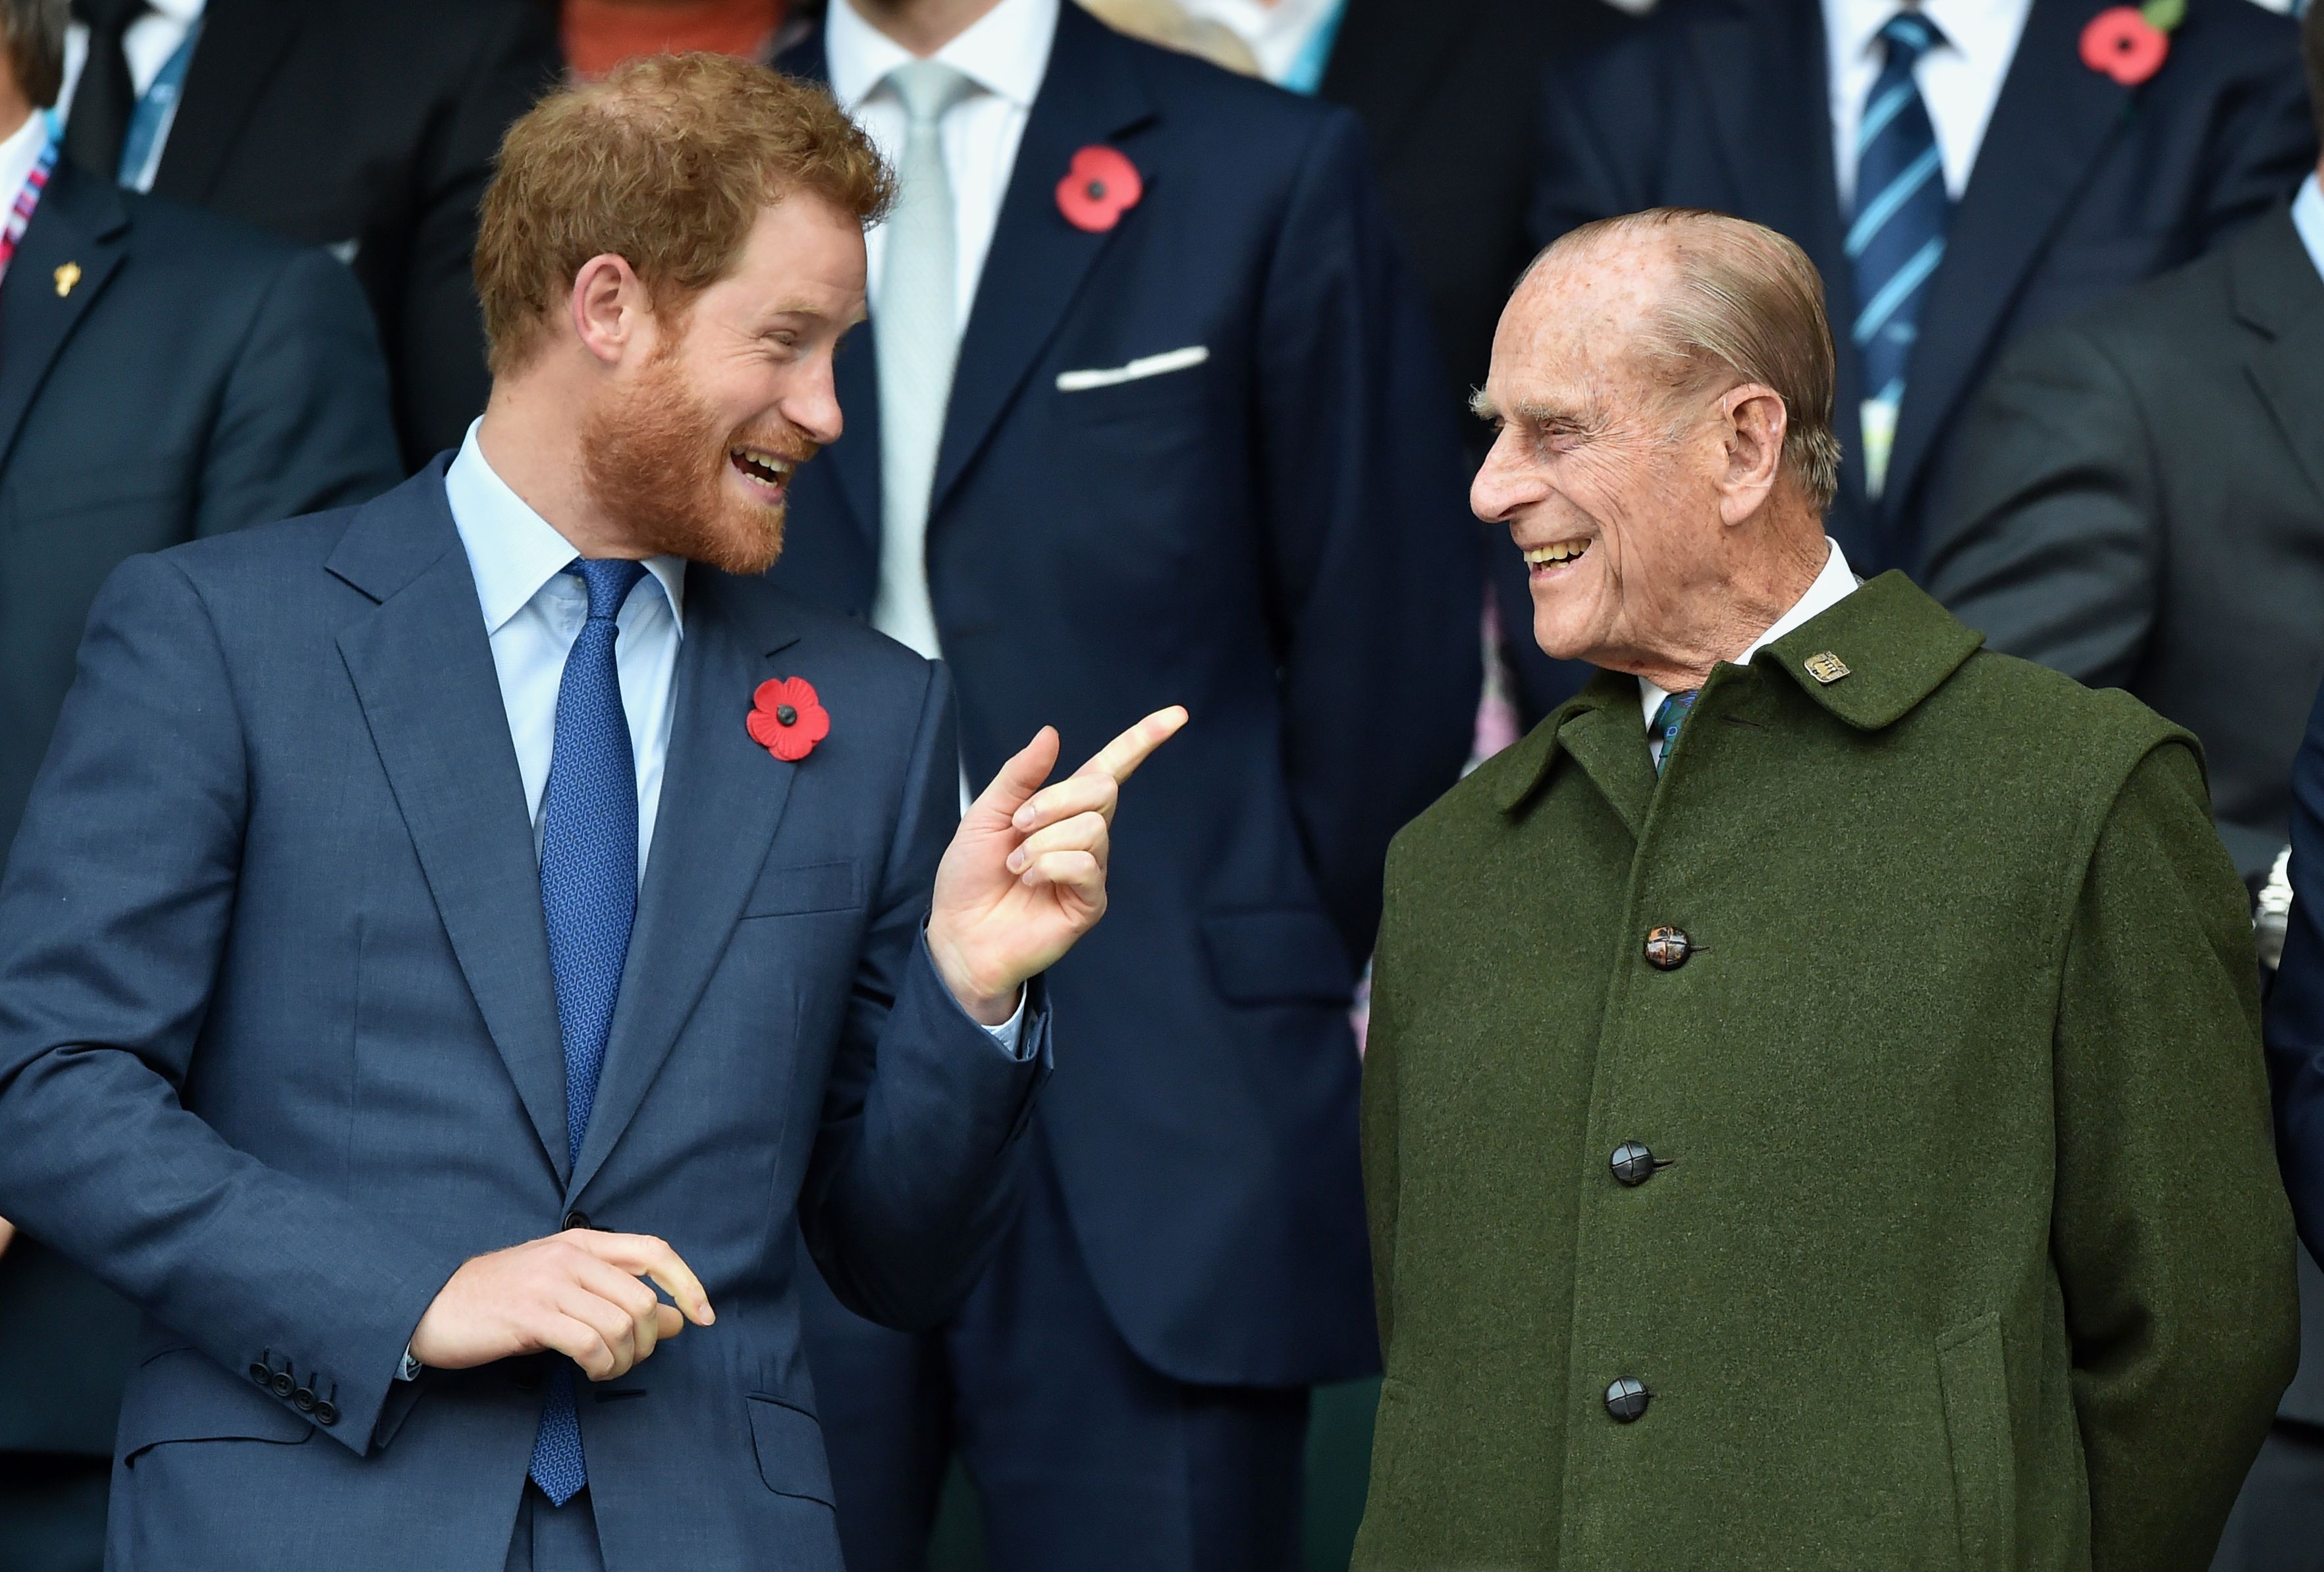 Prince Harry and Prince Philip, Duke of Edinburgh chatting at the 2015 Rugby World Cup Final match between New Zealand and Australia at Twickenham Stadium in London, England | Photo: Getty Images